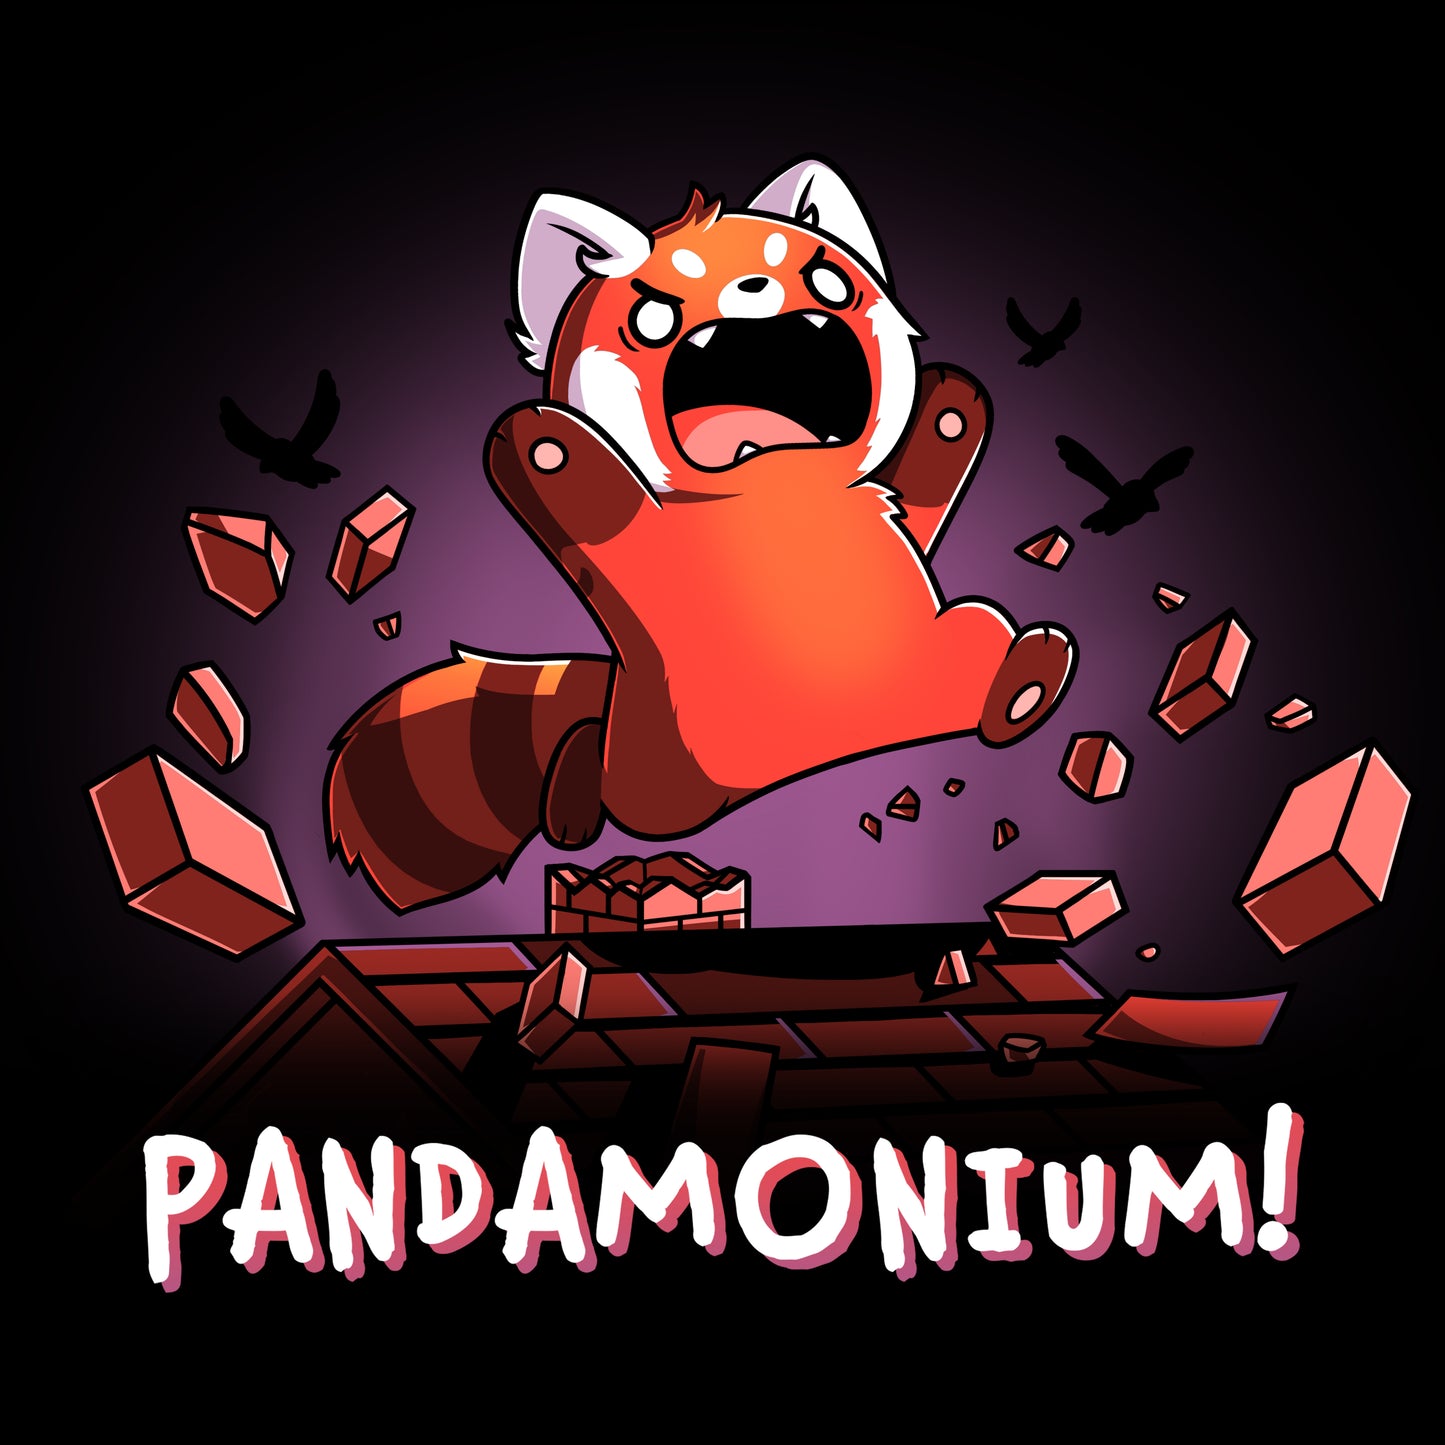 A red panda jumping out of a brick wall in Disney/Pixar's Mei Mei-inspired Pandamonium.